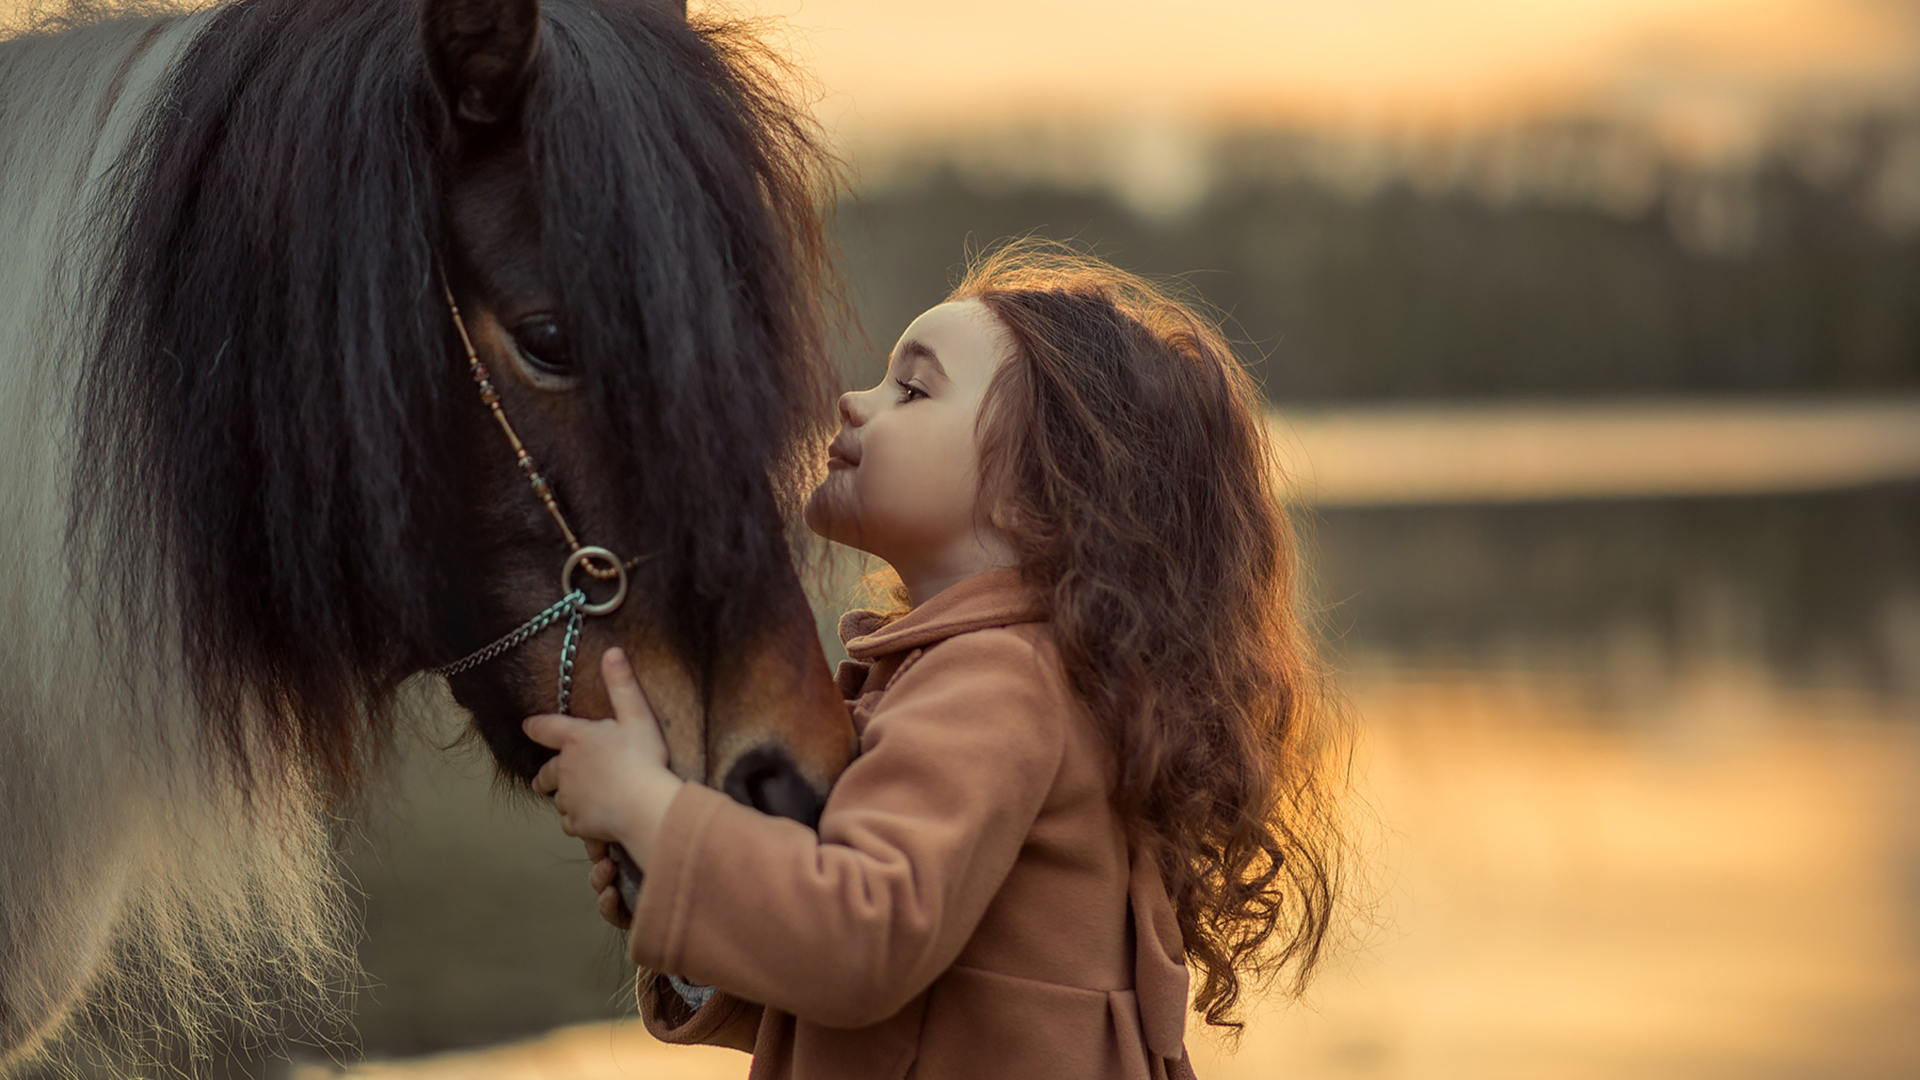 Cute Little Girl Is Playing With Horse Wearing Brown Dress In Blur Wallpaper 2K Cute